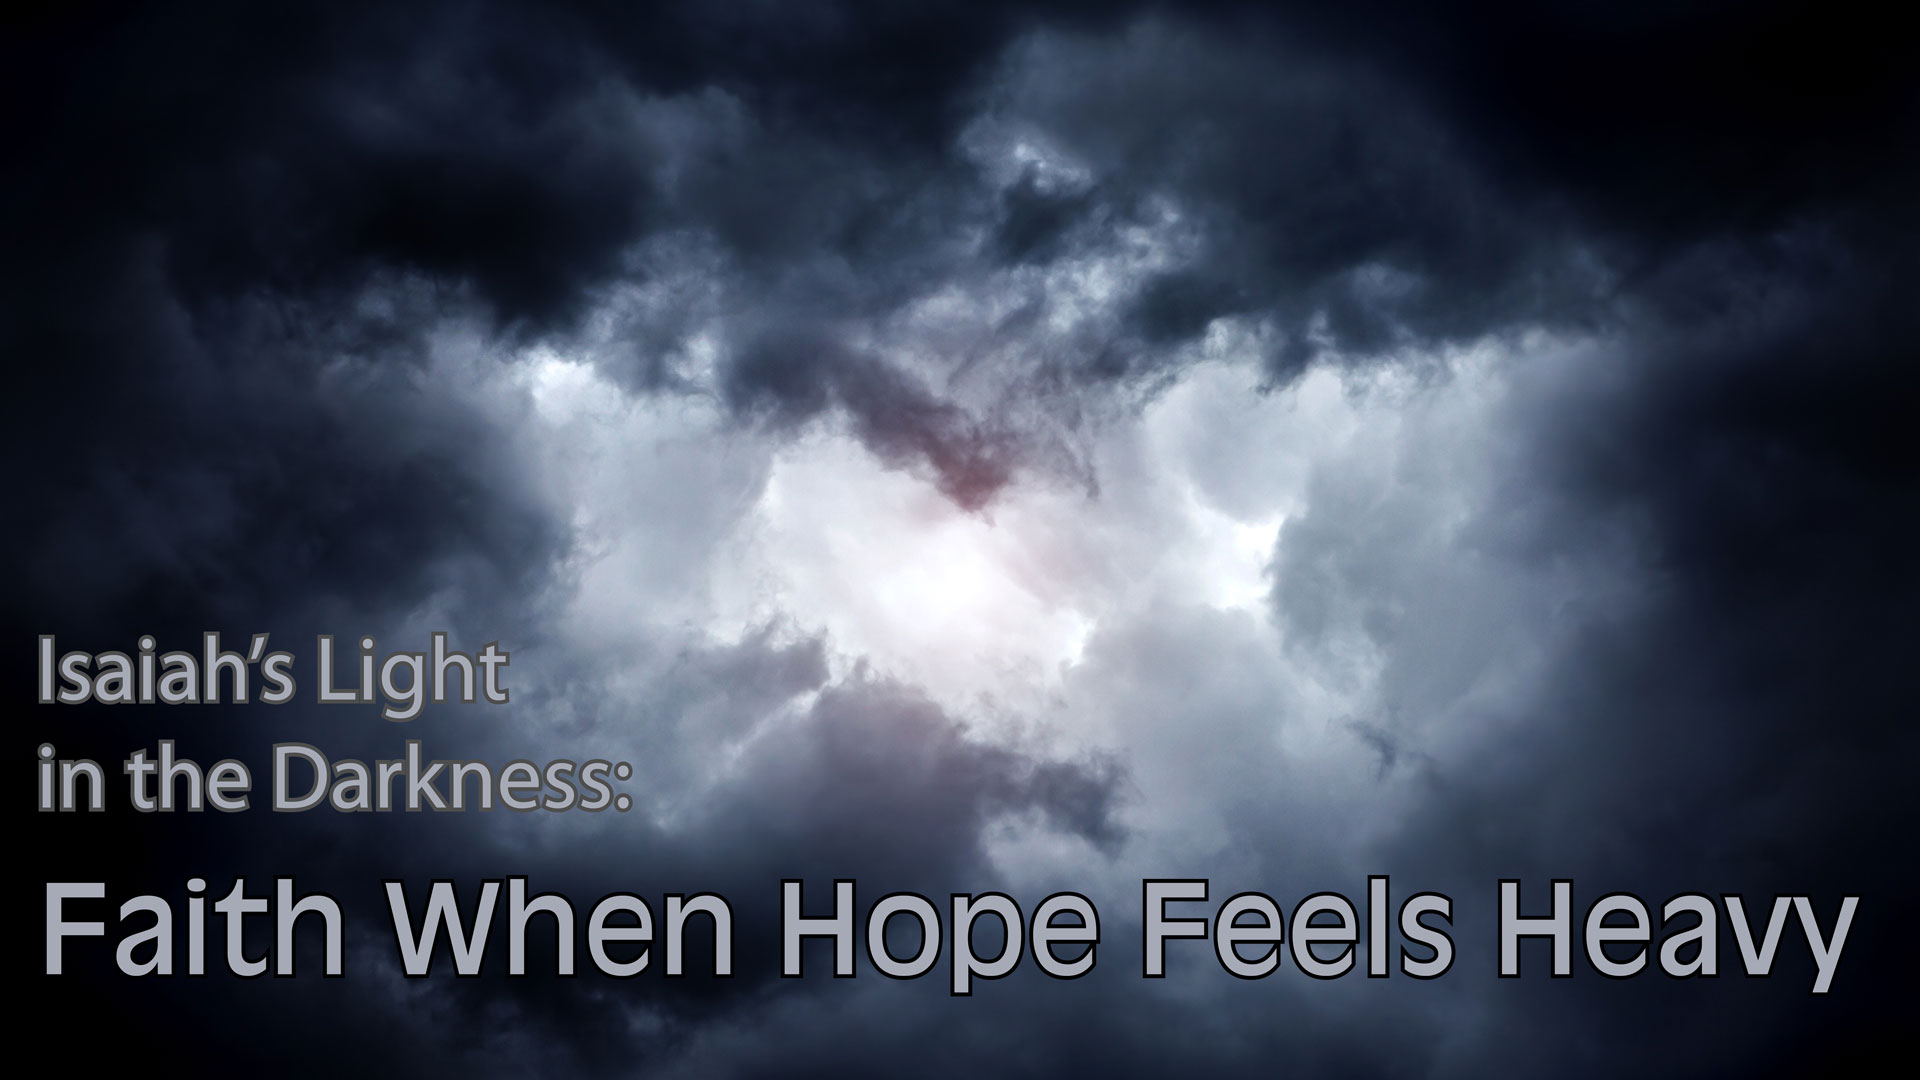 Isaiah's Light in the Darkness: 
Faith When Hope Feels Heavy
